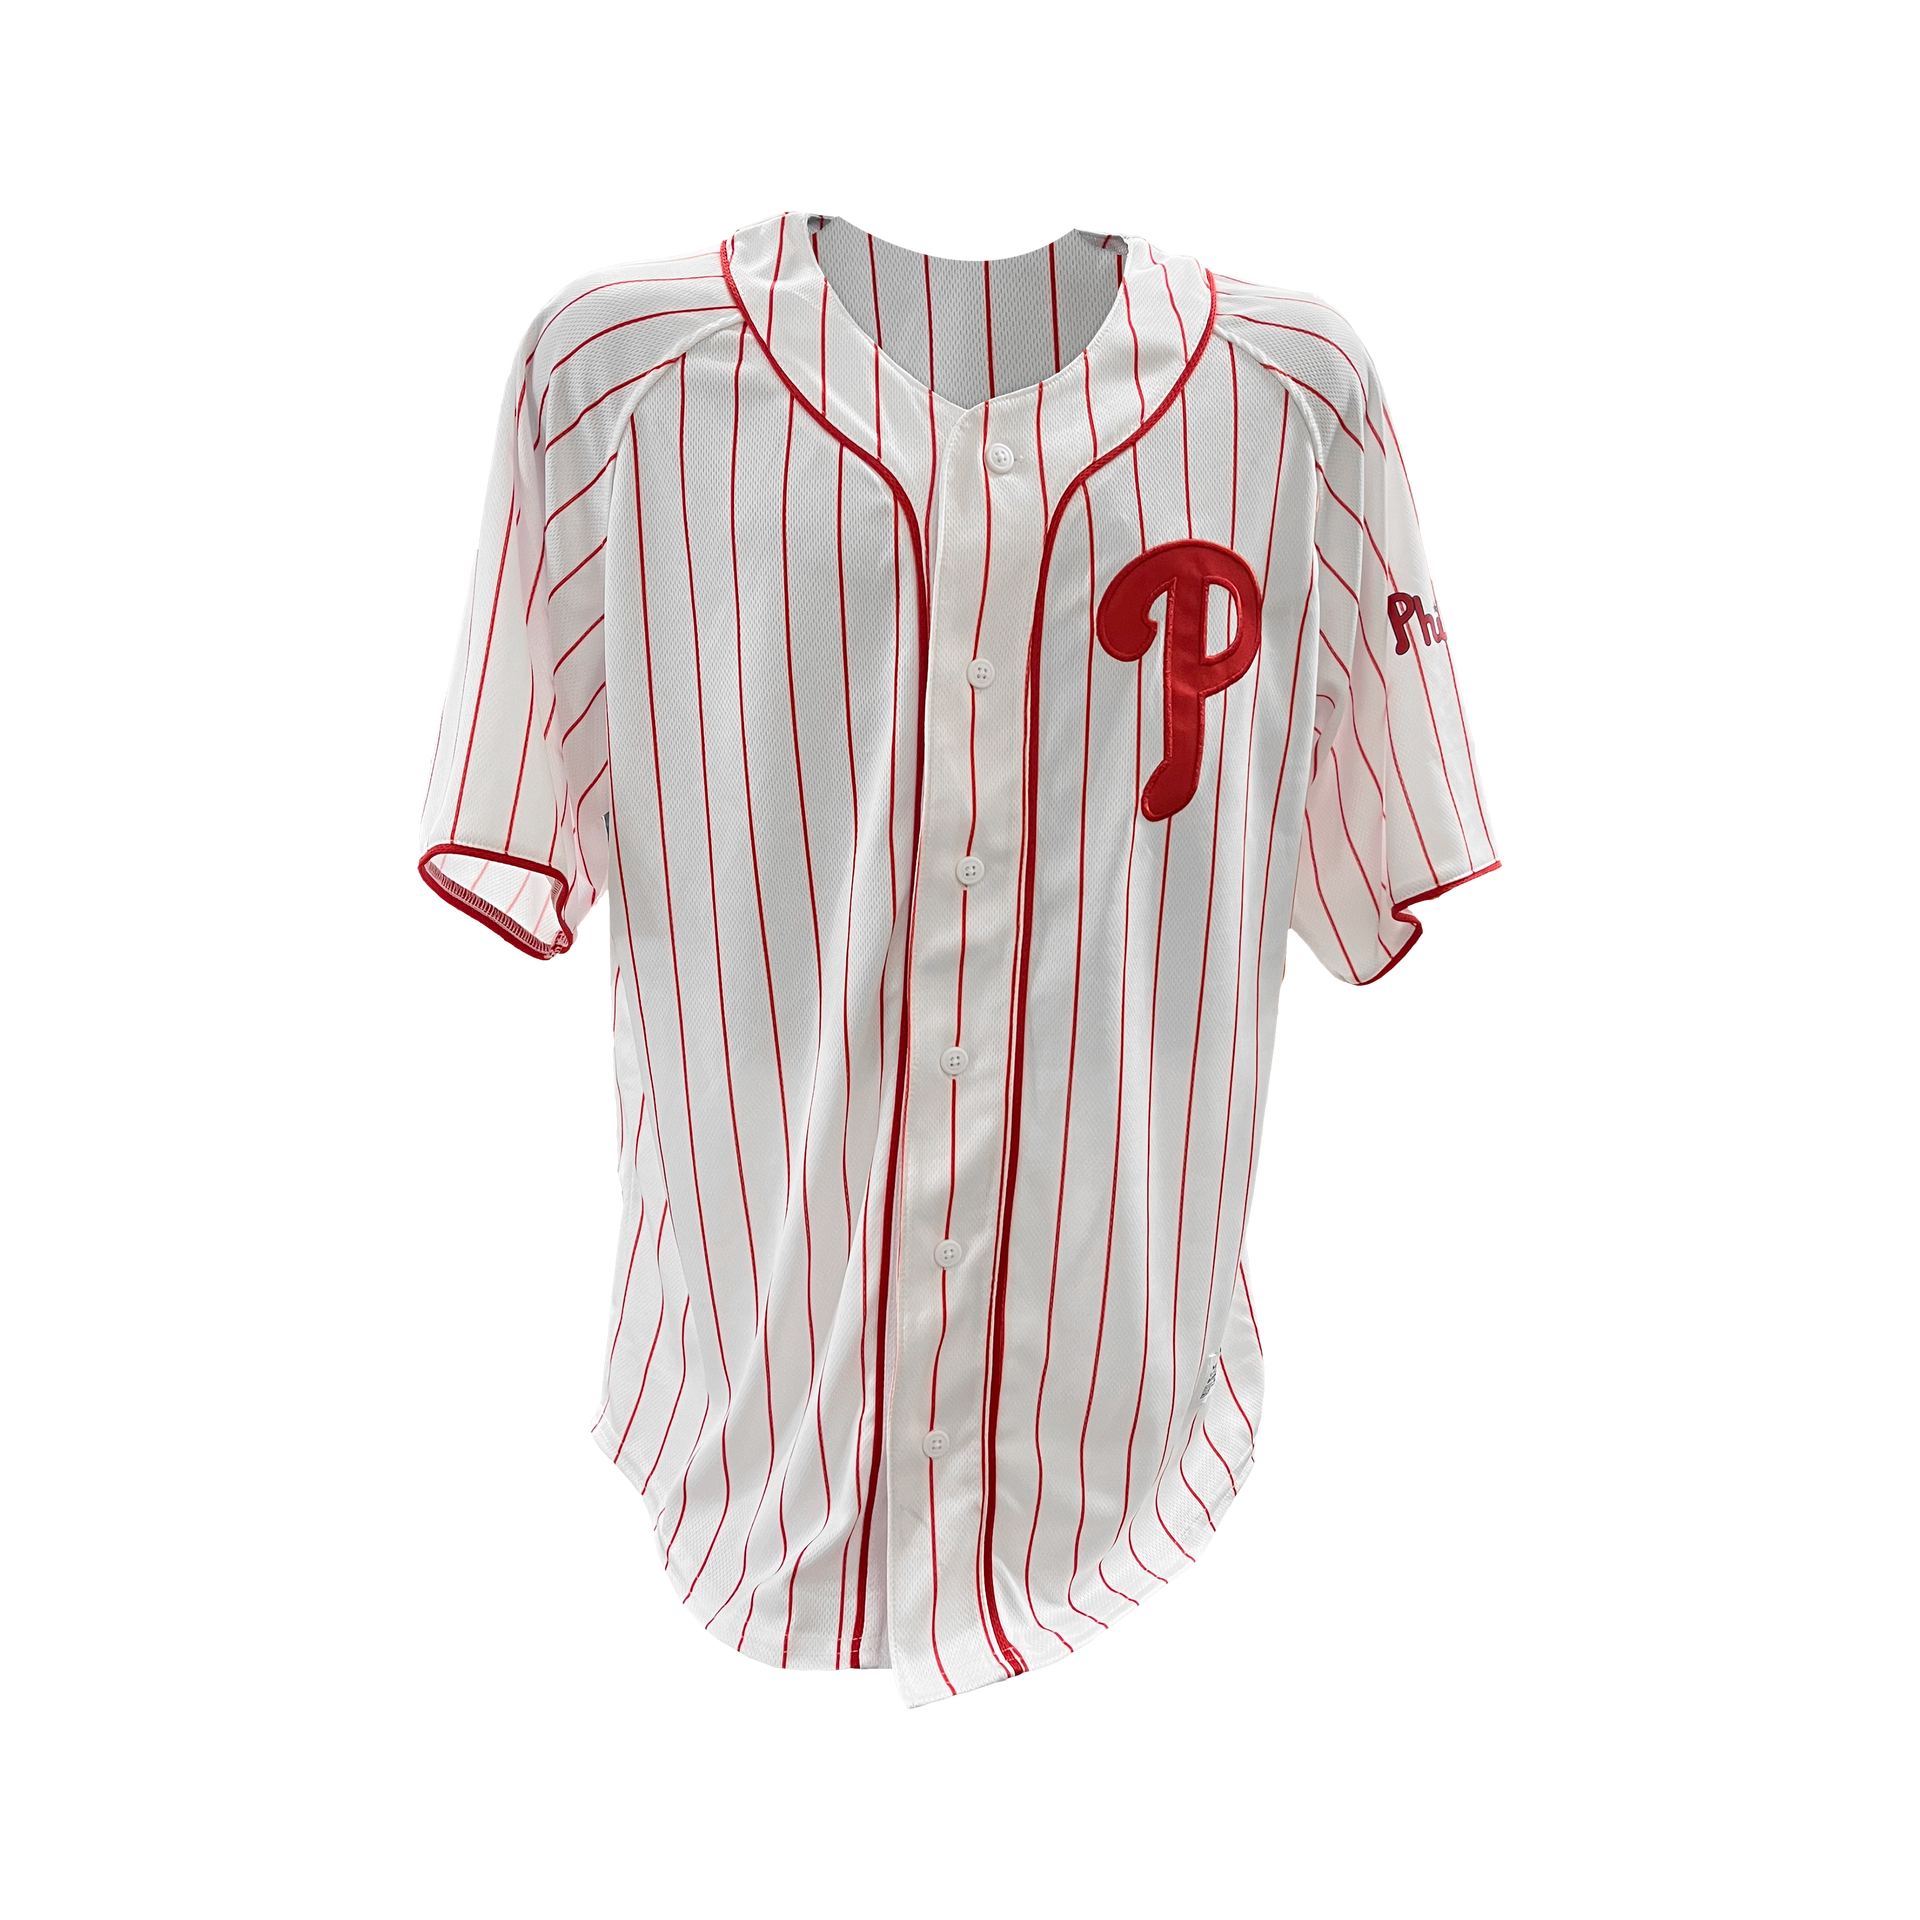 Roy Halladay Philadelphia Phillies Mitchell & Ness Cooperstown Collection  Batting Practice Jersey